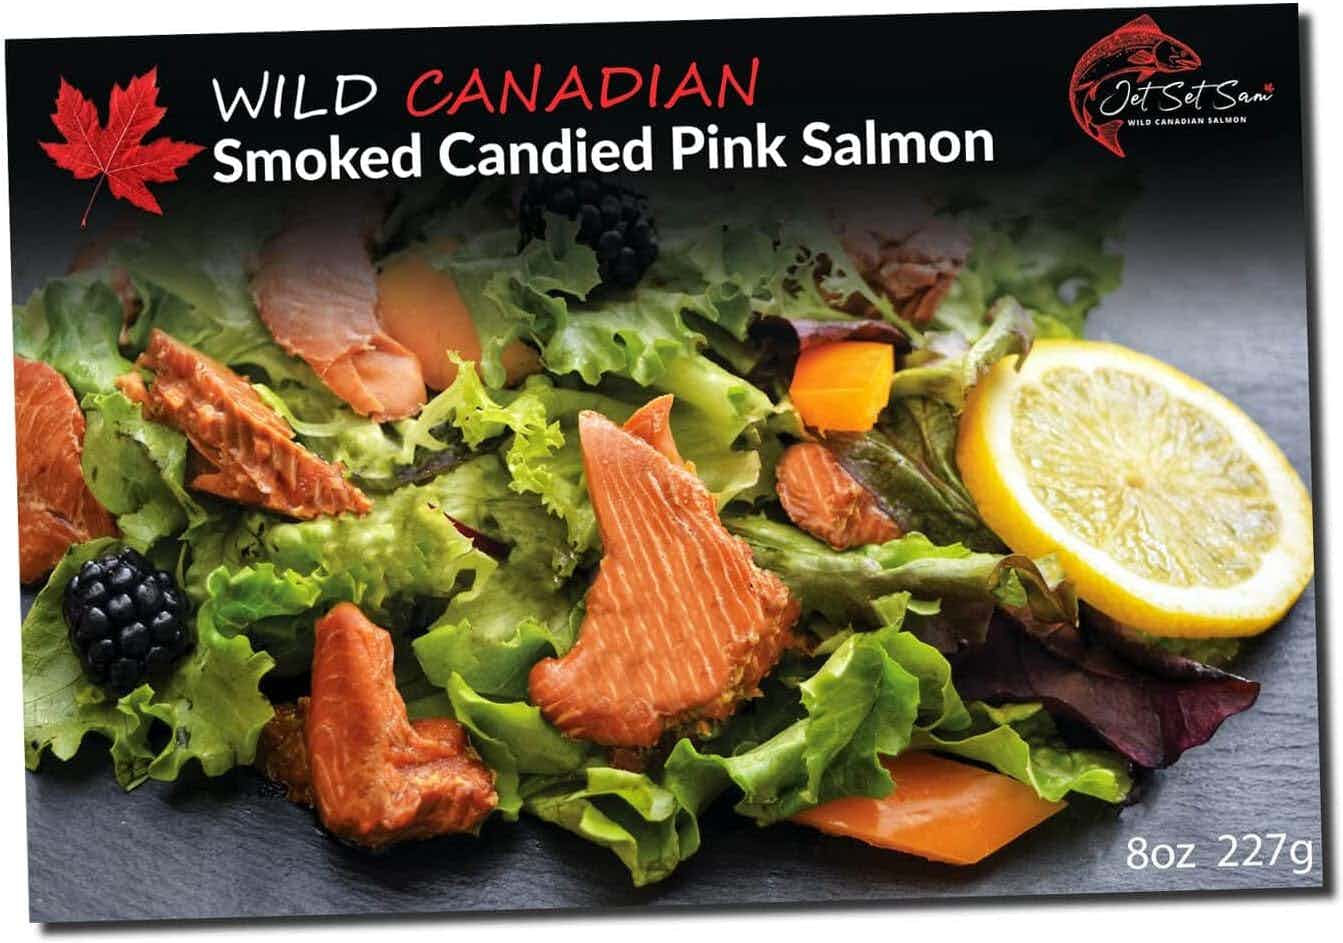 Wild Canadian Smoked Candied Pink Salmon